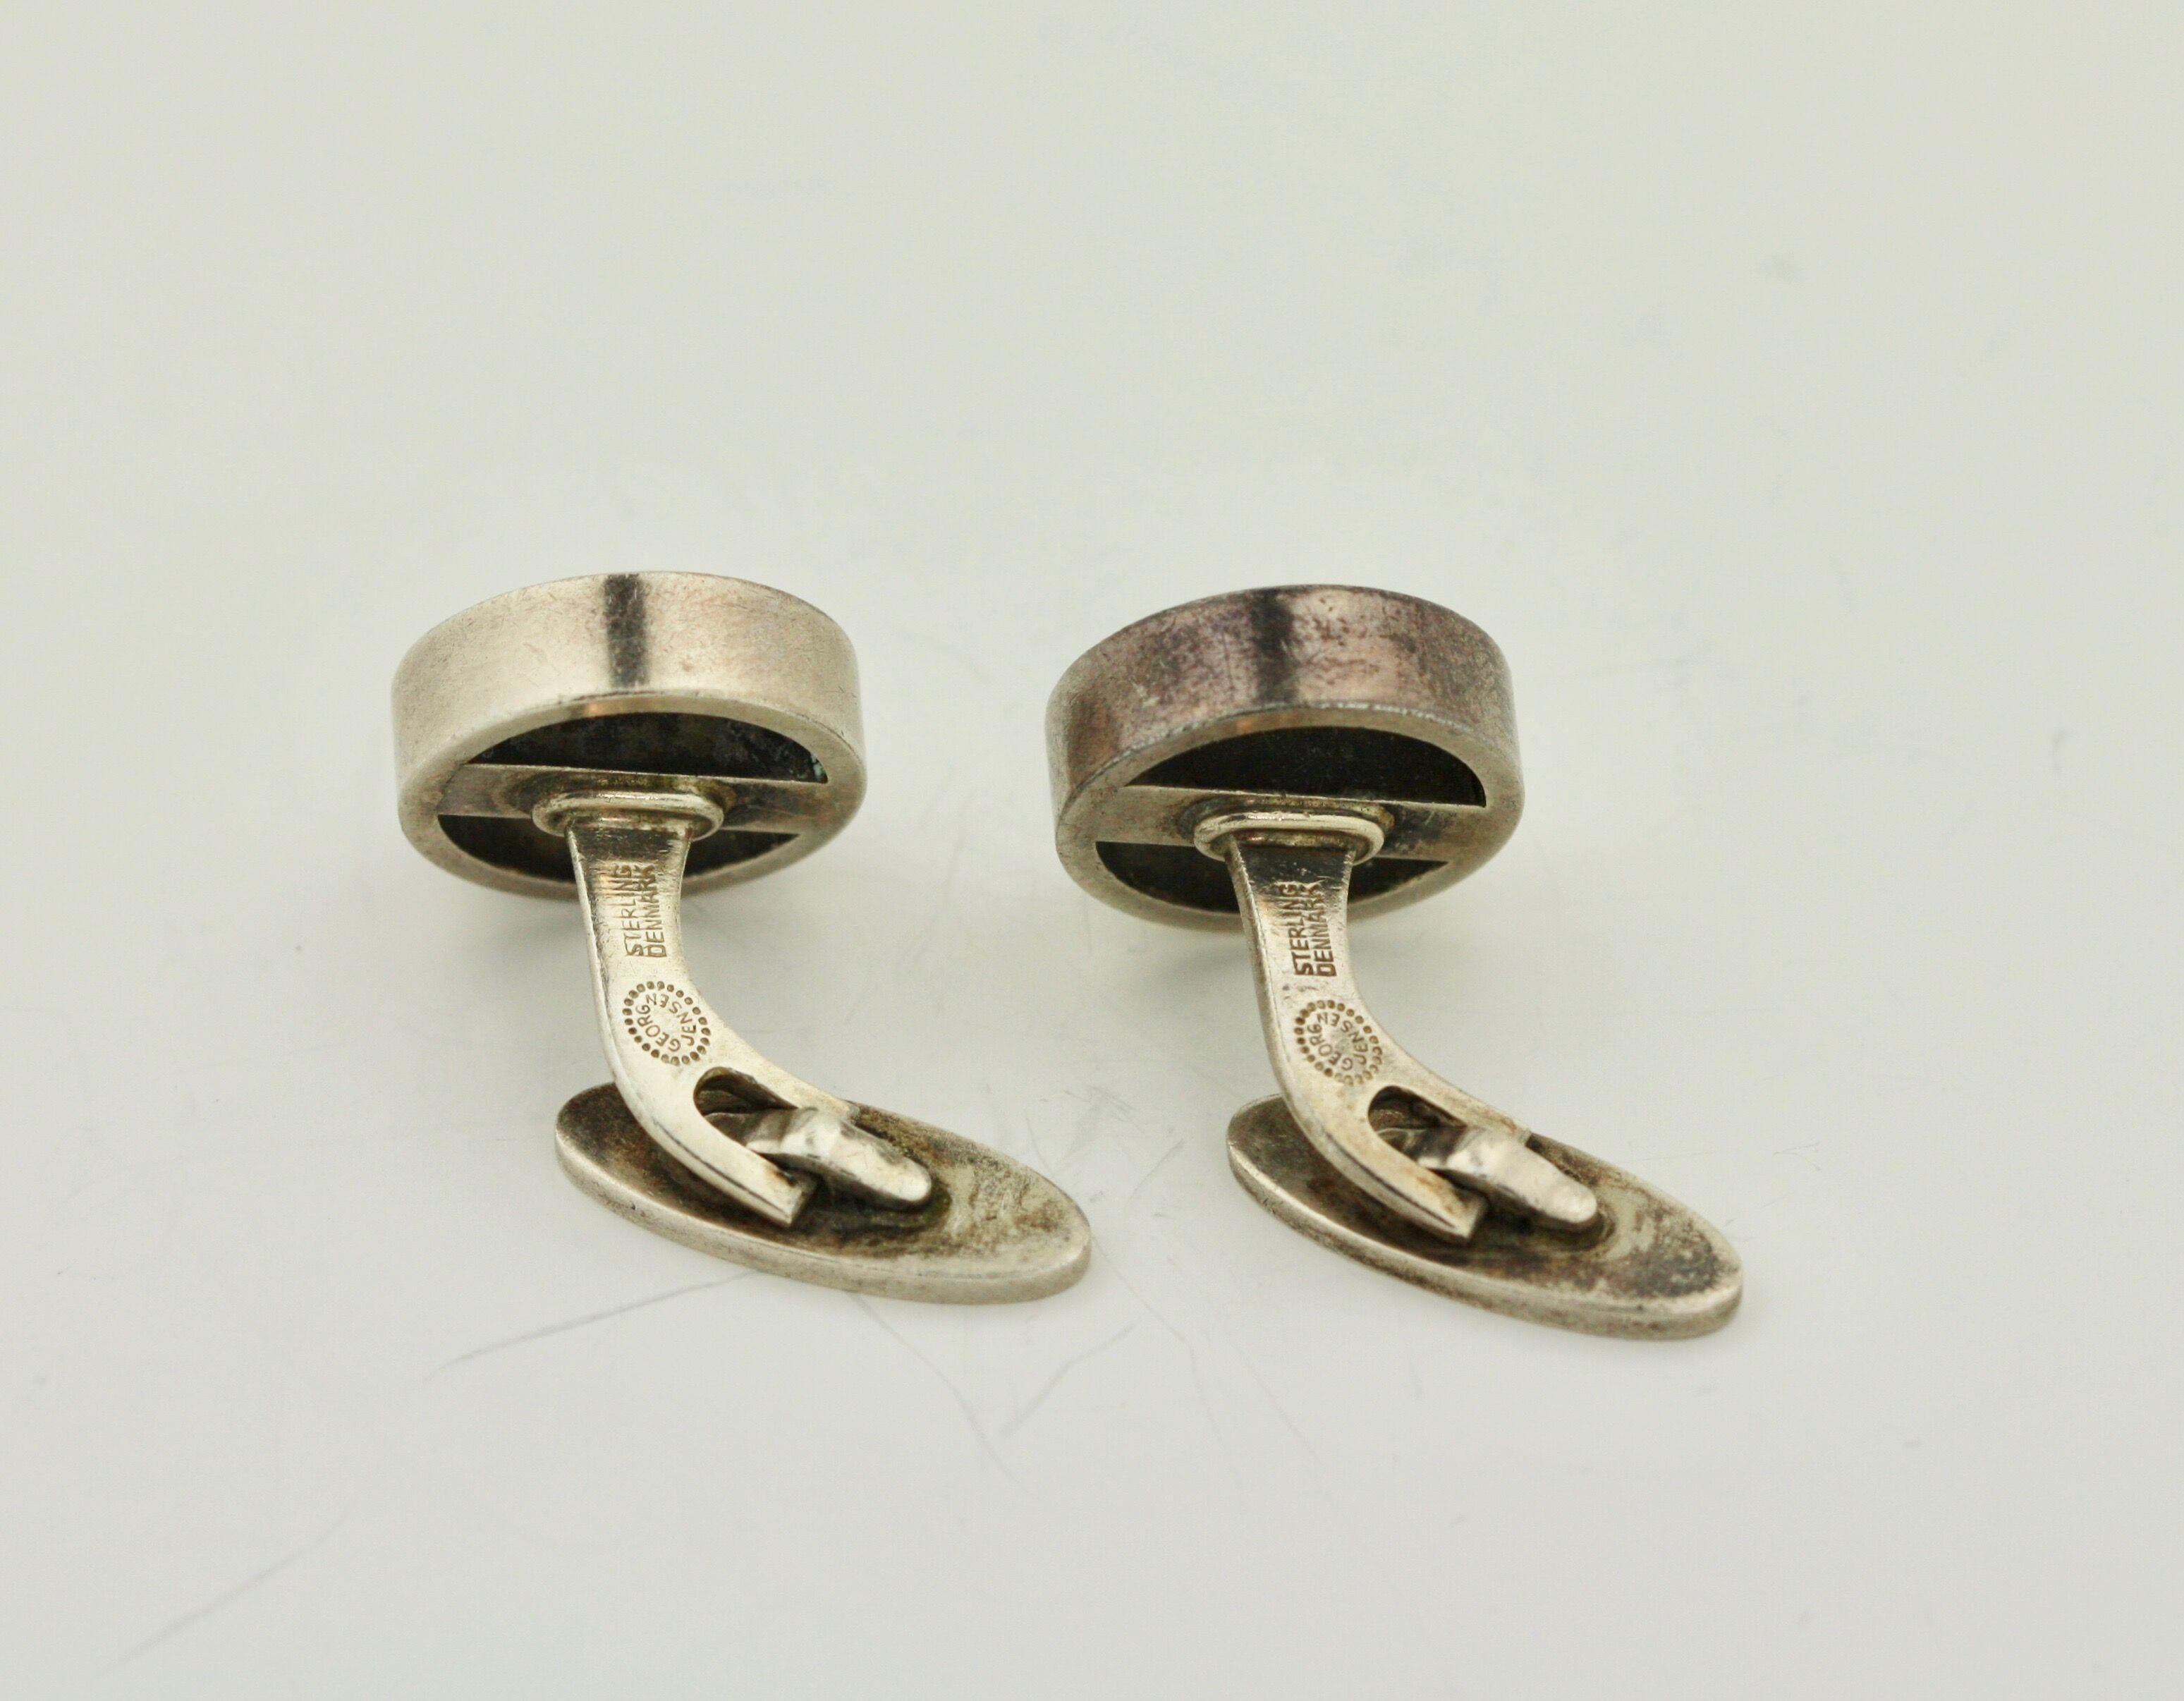 Pair of Vintage Sterling Silver Cufflinks, Georg Jensen In Good Condition For Sale In Palm Beach, FL